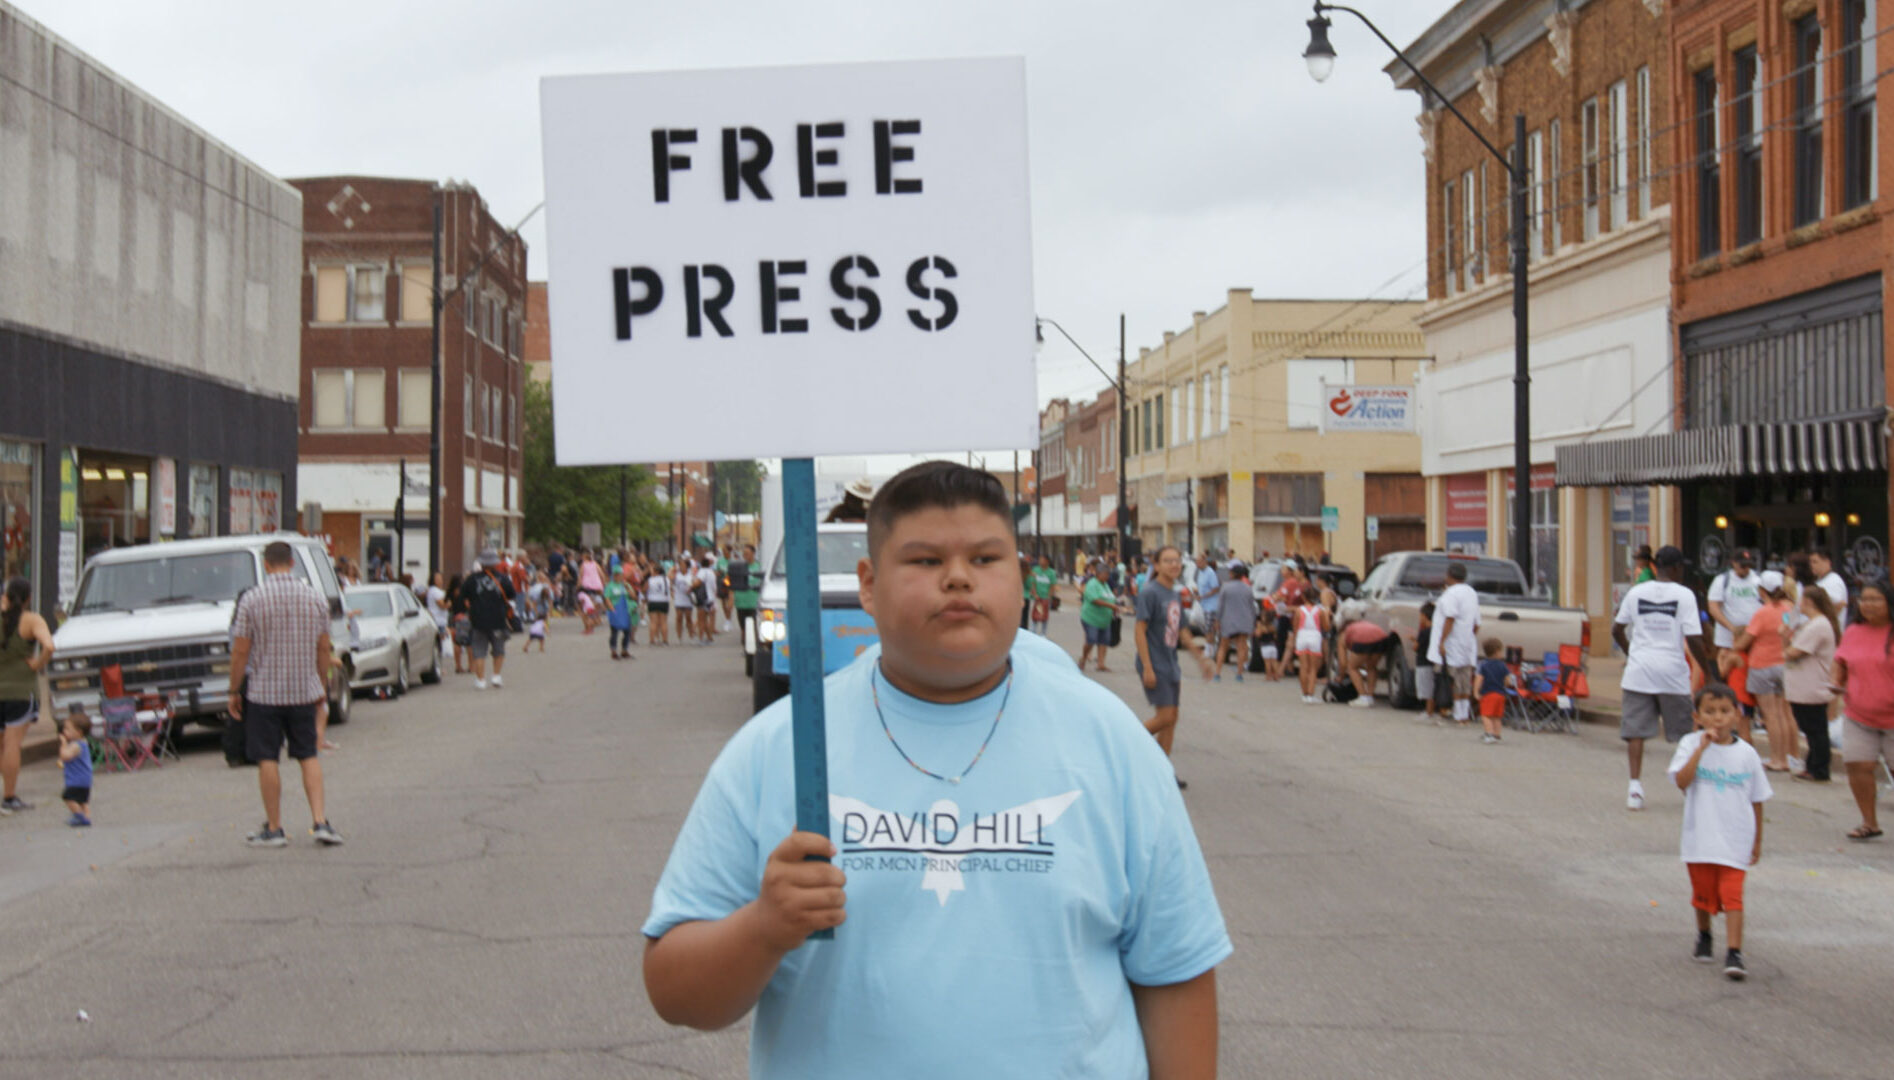 Photo of a man in a blue shirt standing on a street holding a "Free Press" protest sign